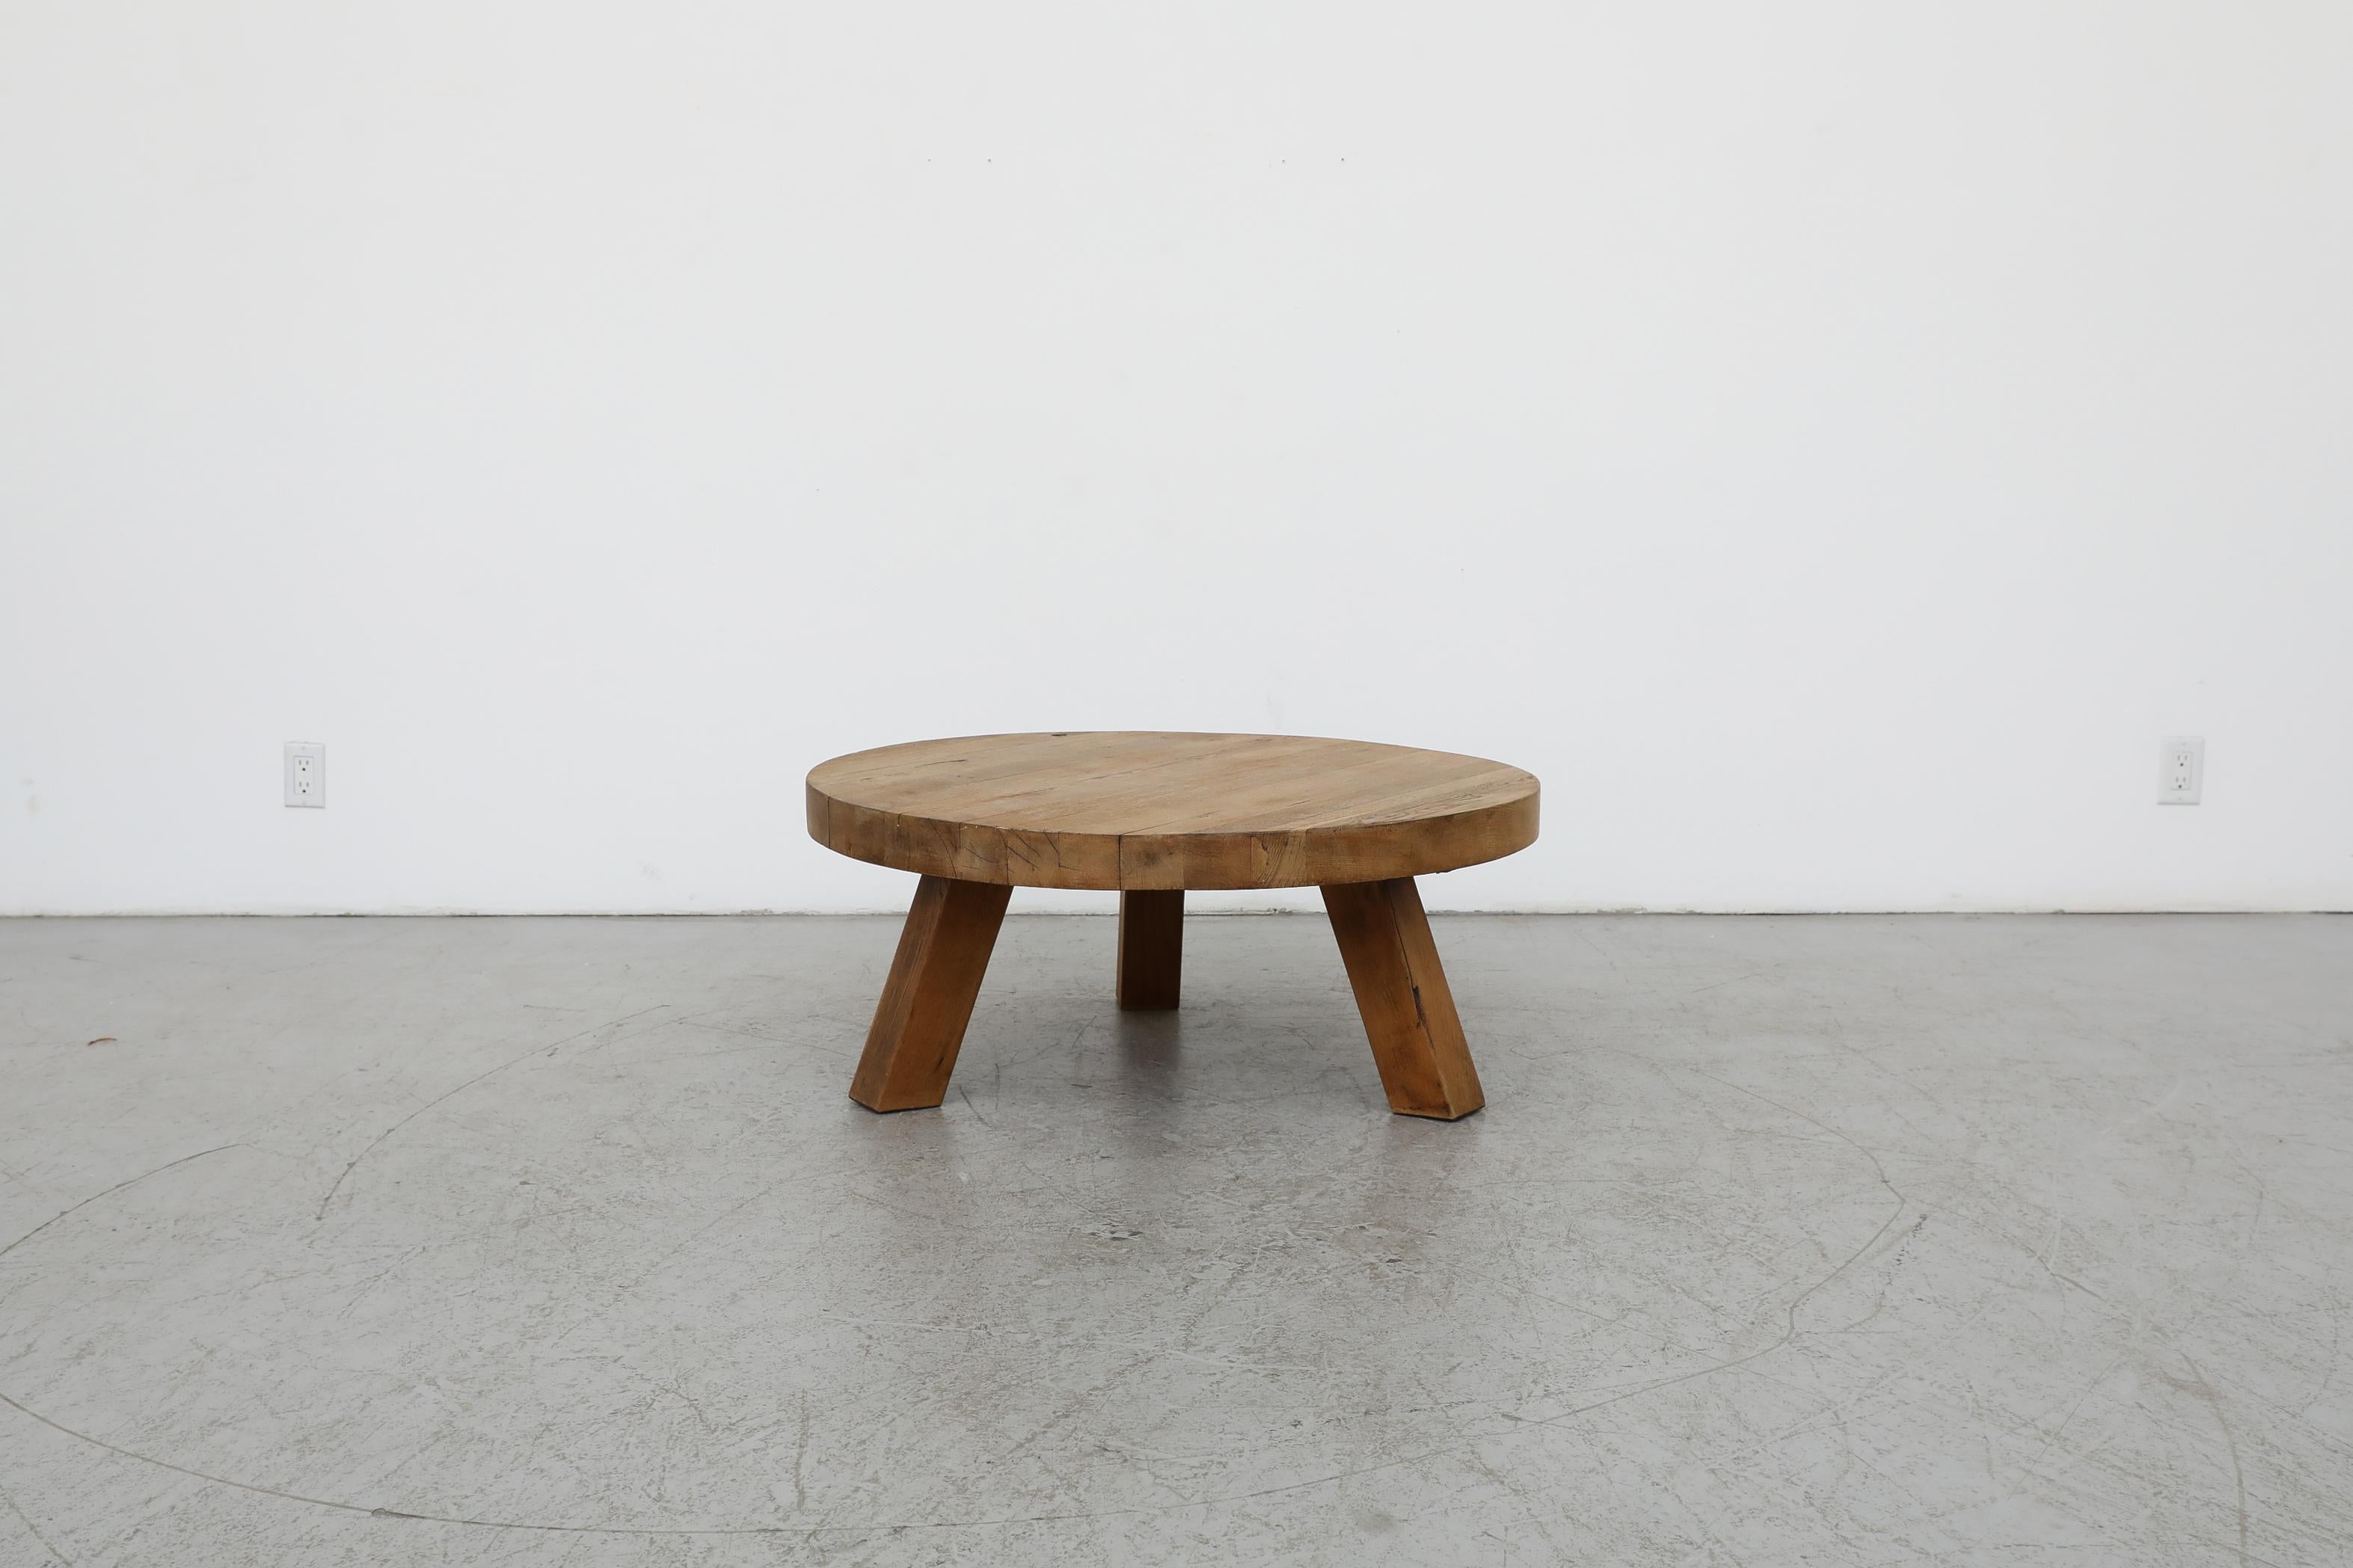 Belgian, Brutalist, heavy round coffee table from solid oak. Outfitted with three very sturdy square legs. In original condition with visible wear and patina consistent with its age and use. Other similar tables available and listed separately. 